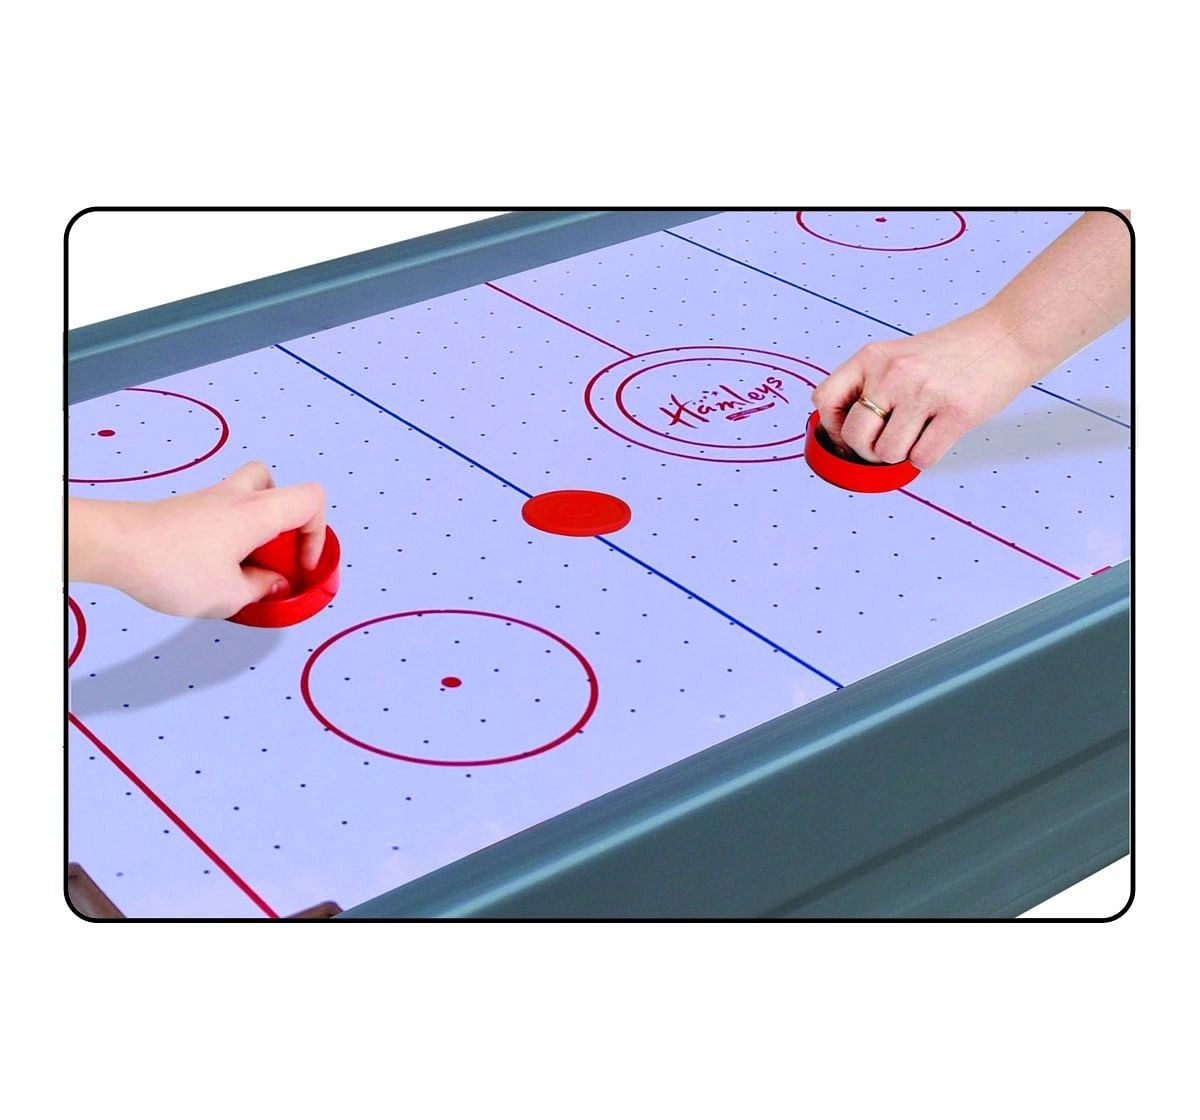 Hamleys Air Hockey Table with Adapter Electronic Game for Kids 3Y+, Multicolour